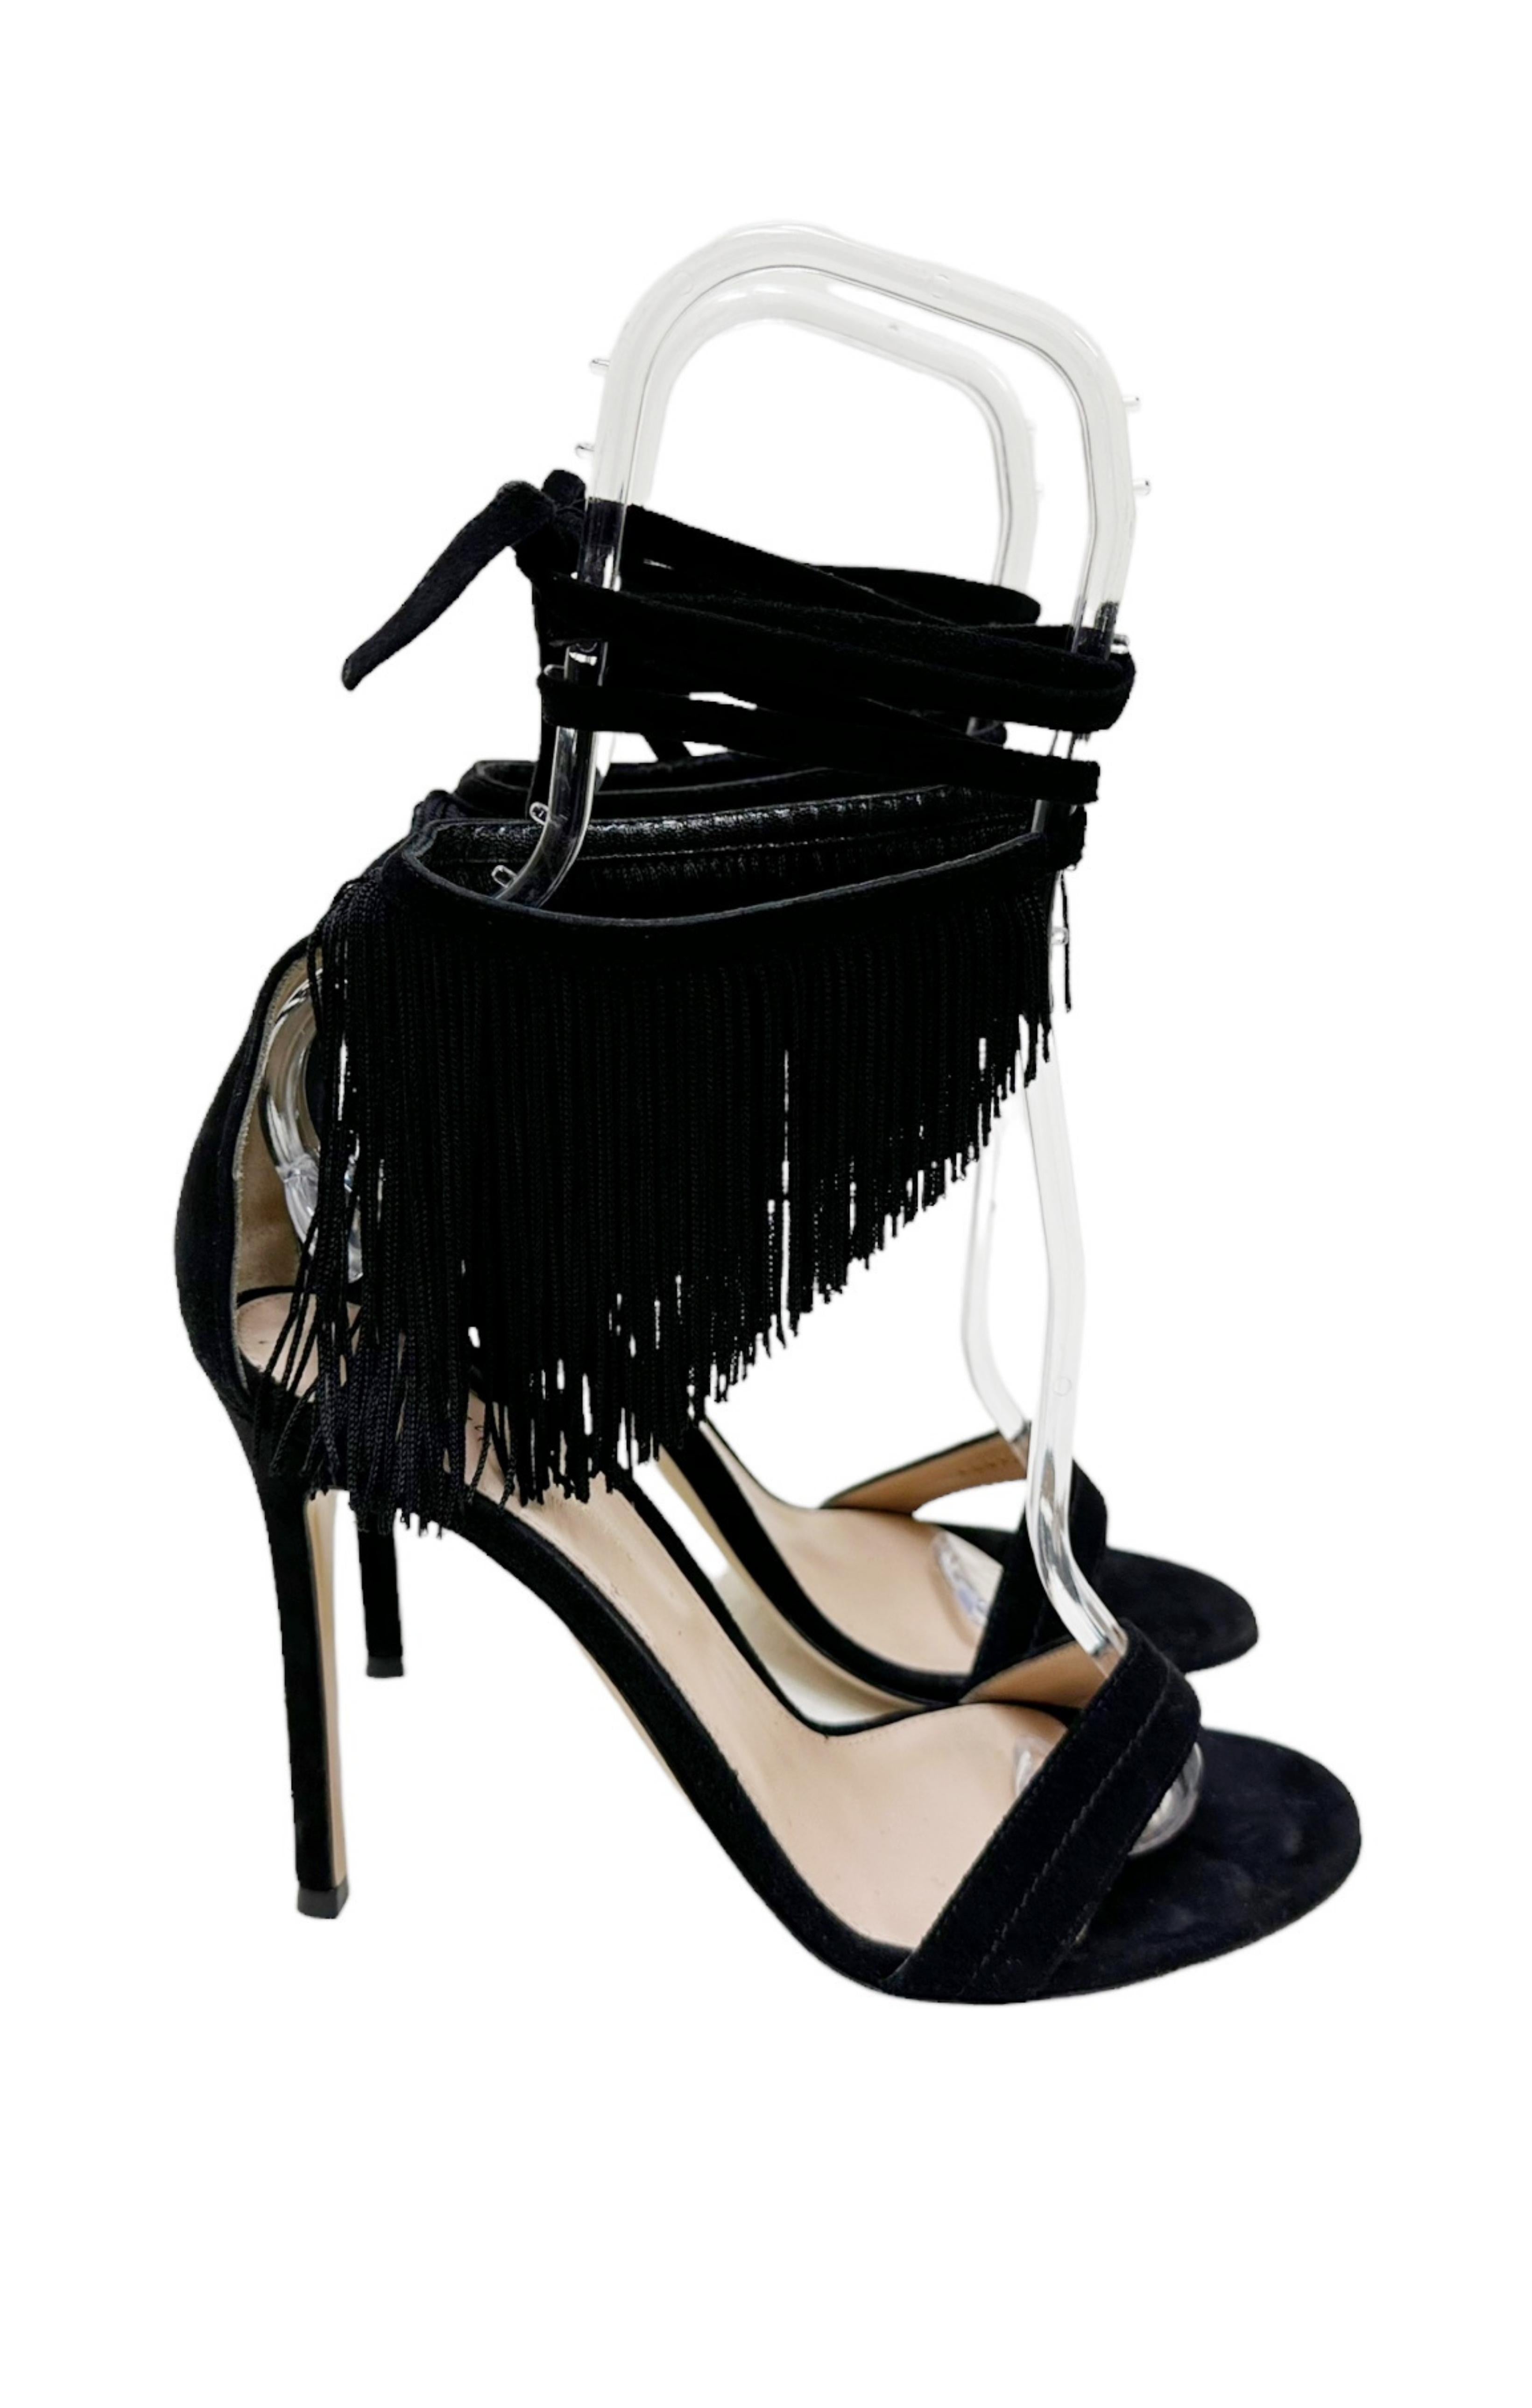 GIANVITO ROSSI Sandals Size: EUR 38 / Fit like US 8